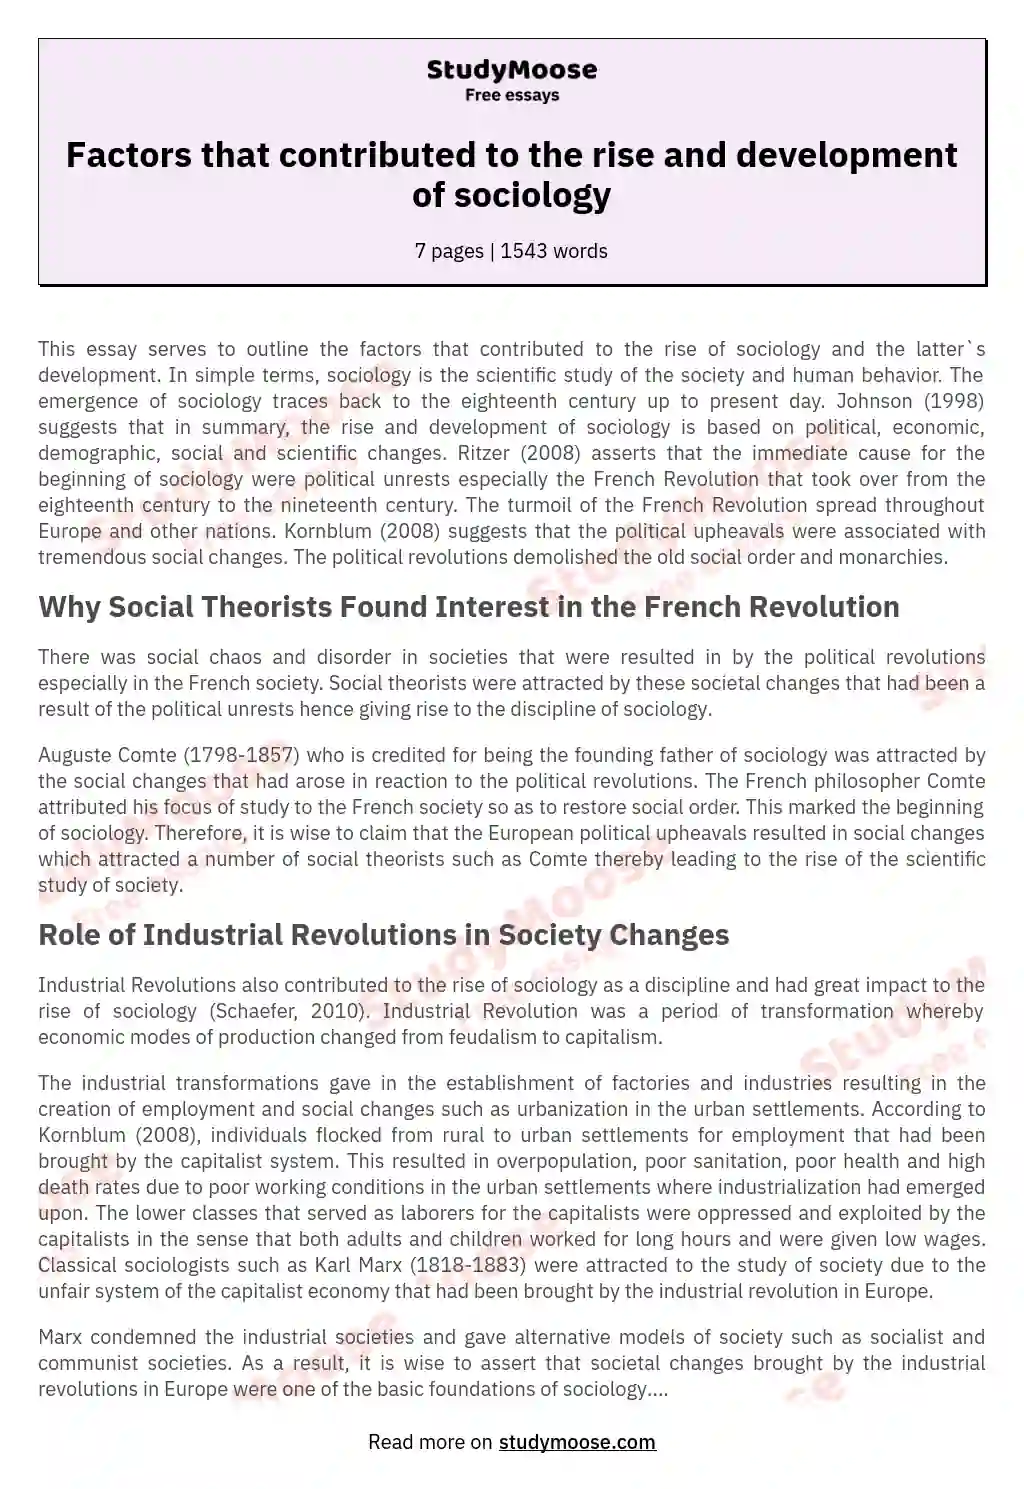 Factors that contributed to the rise and development of sociology essay